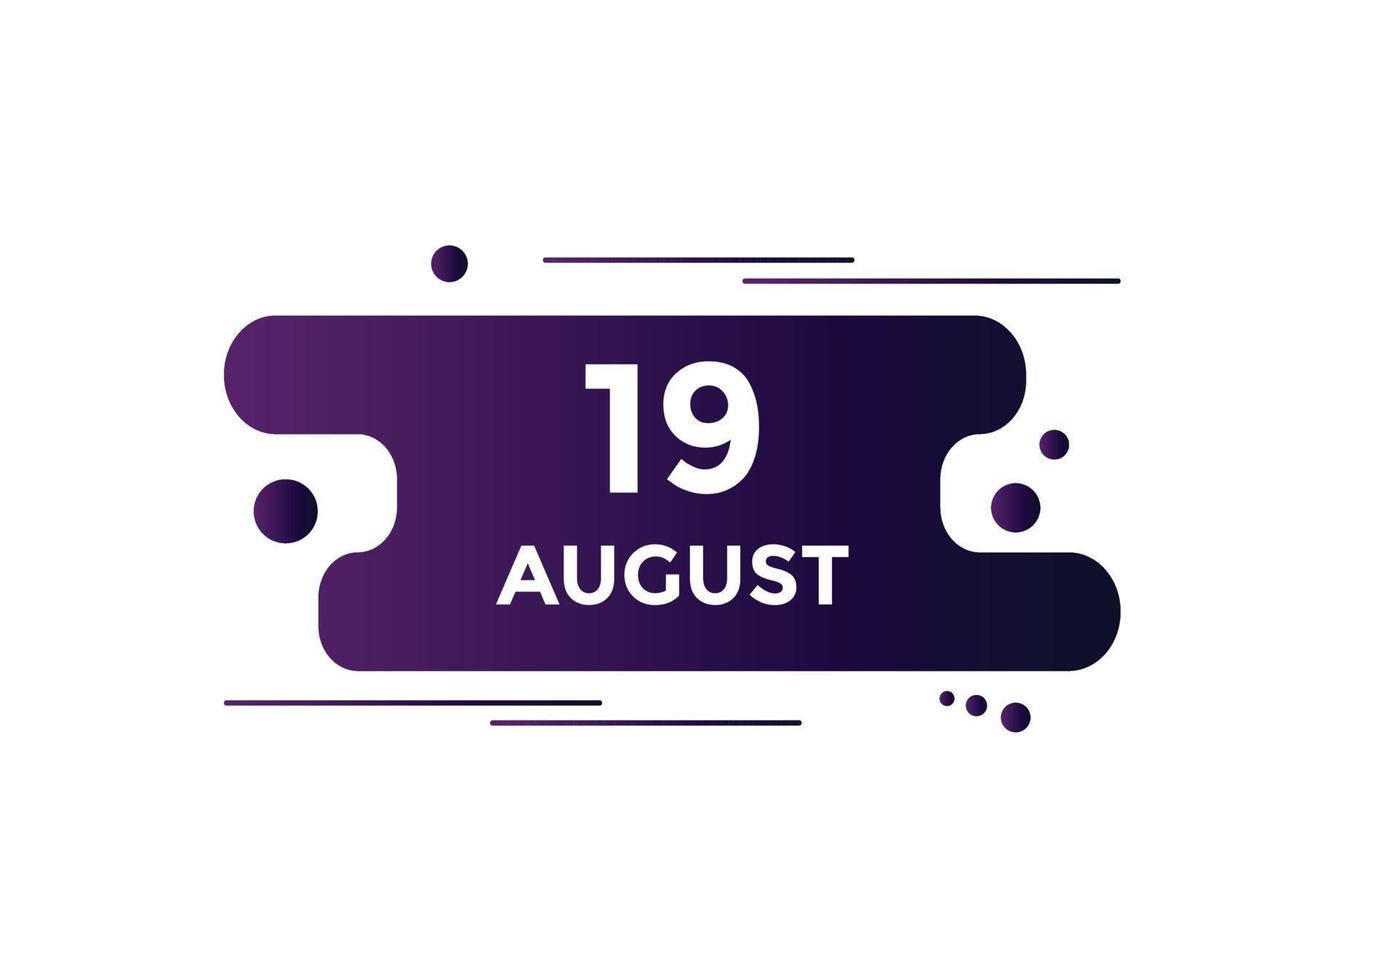 august-19-calendar-reminder-19th-august-daily-calendar-icon-template